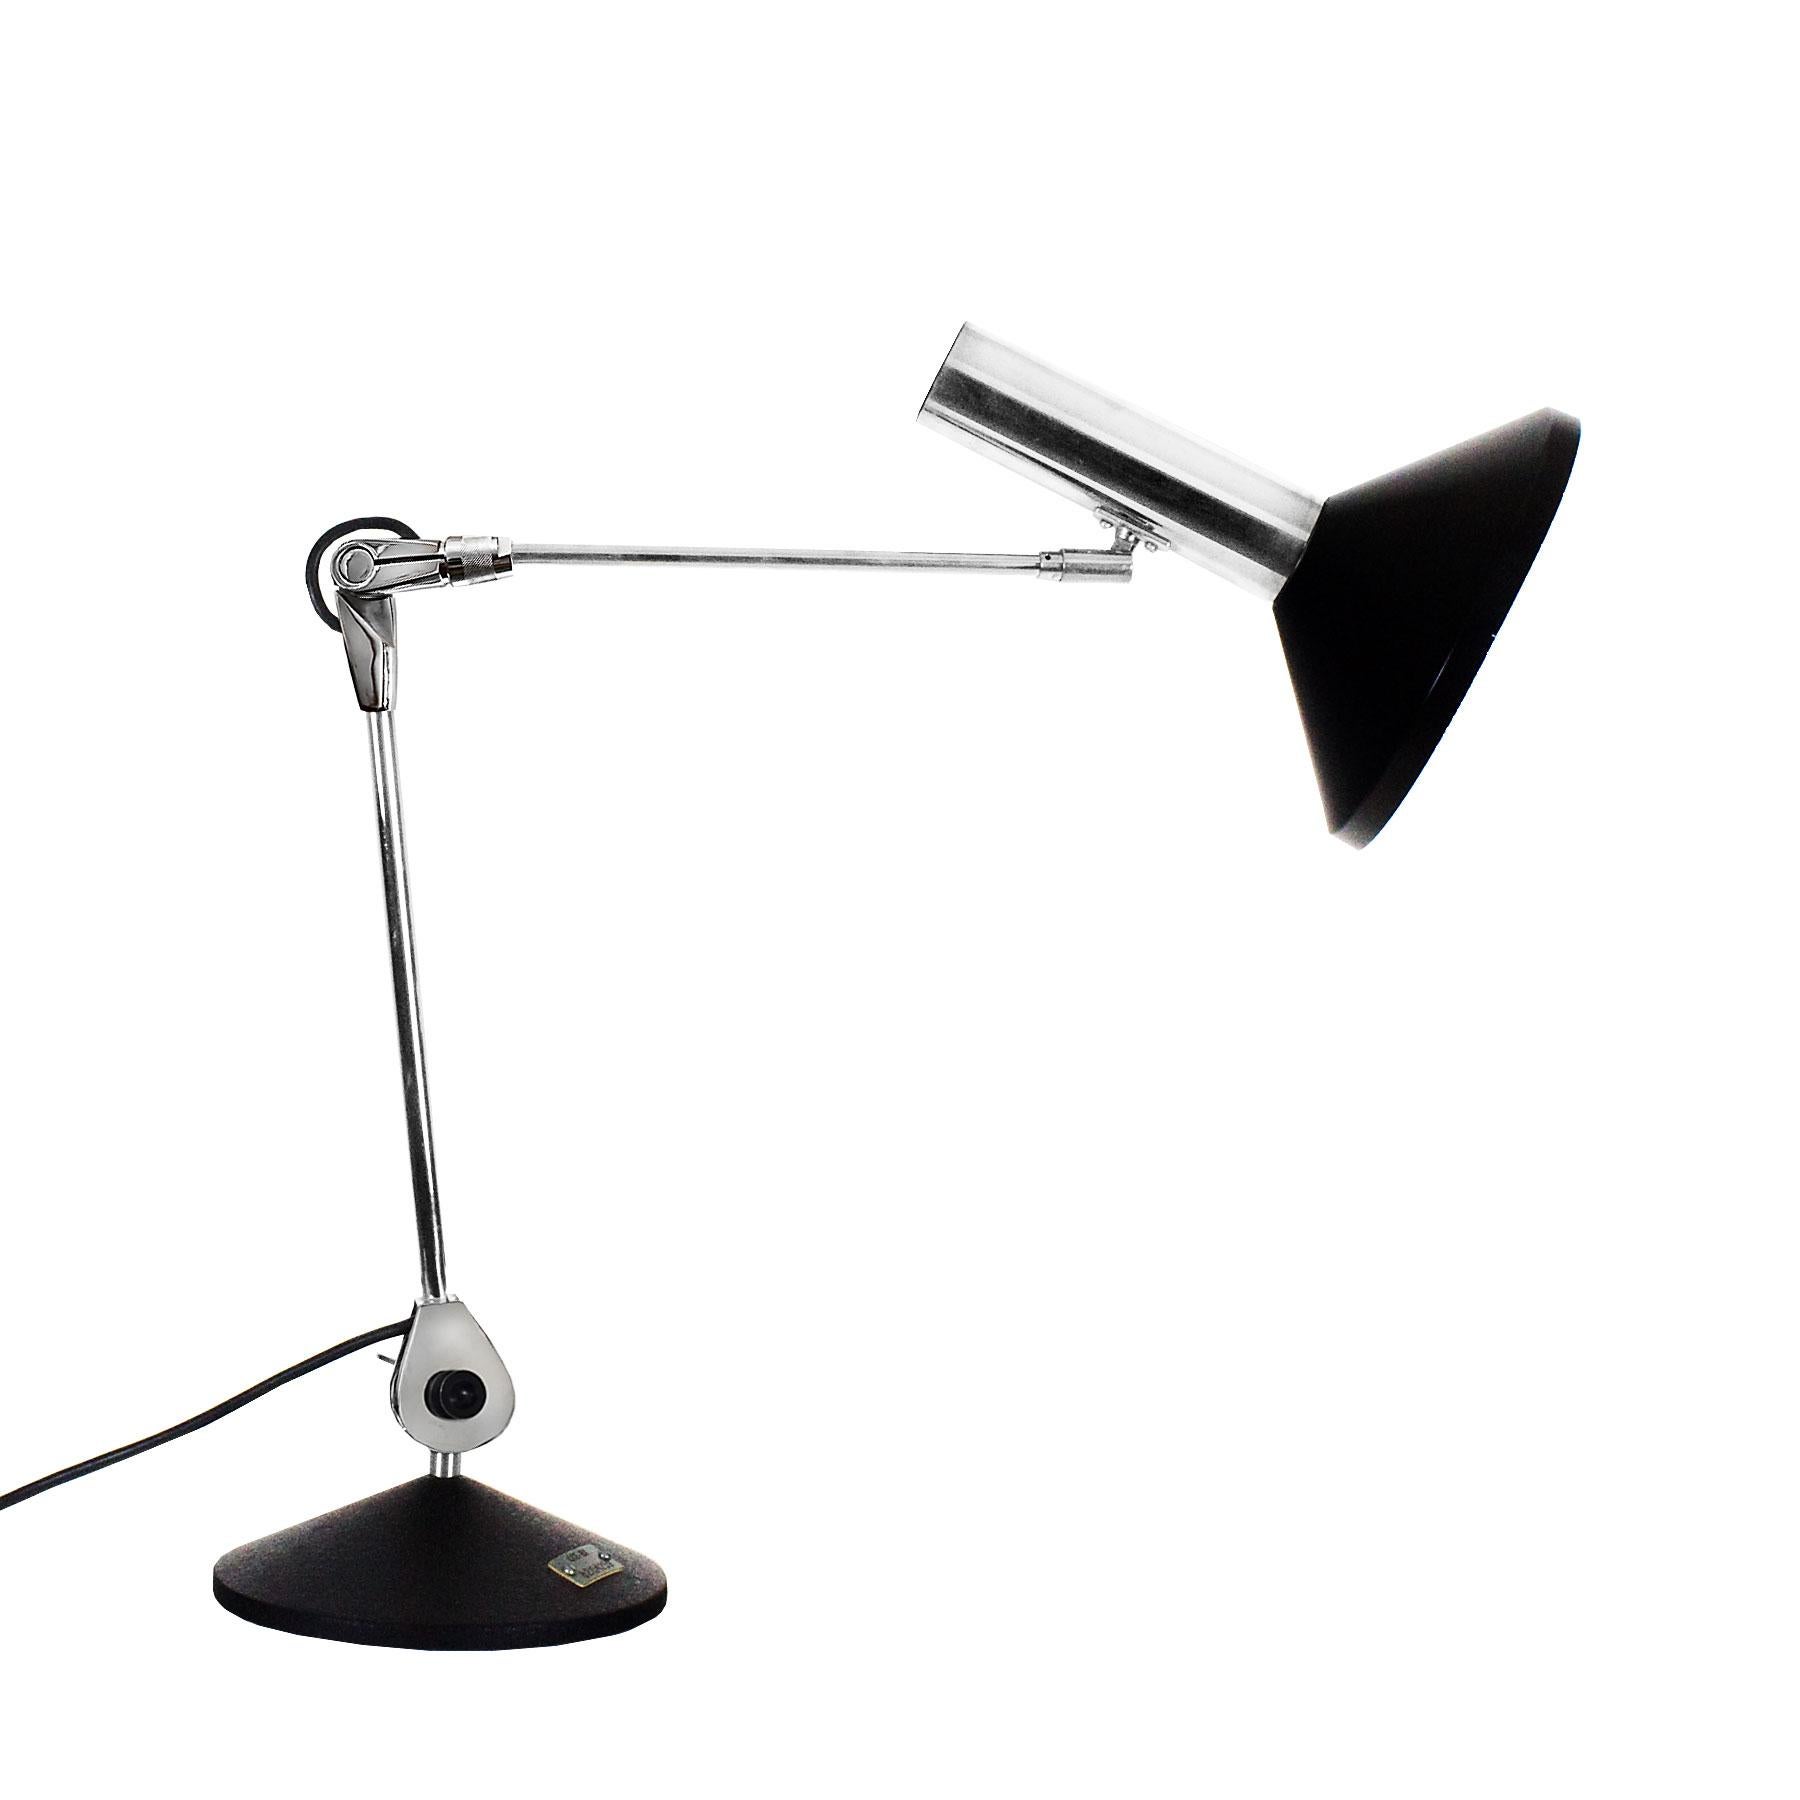 Large articulated chrome-plated desk lamp, granular black painted cast base and black lacquered lampshade. Model used by the C.E.E. (now C.E. European Community).

Belgium, circa 1960

Measures: Max. height 87 cm
Min. height 57 cm.